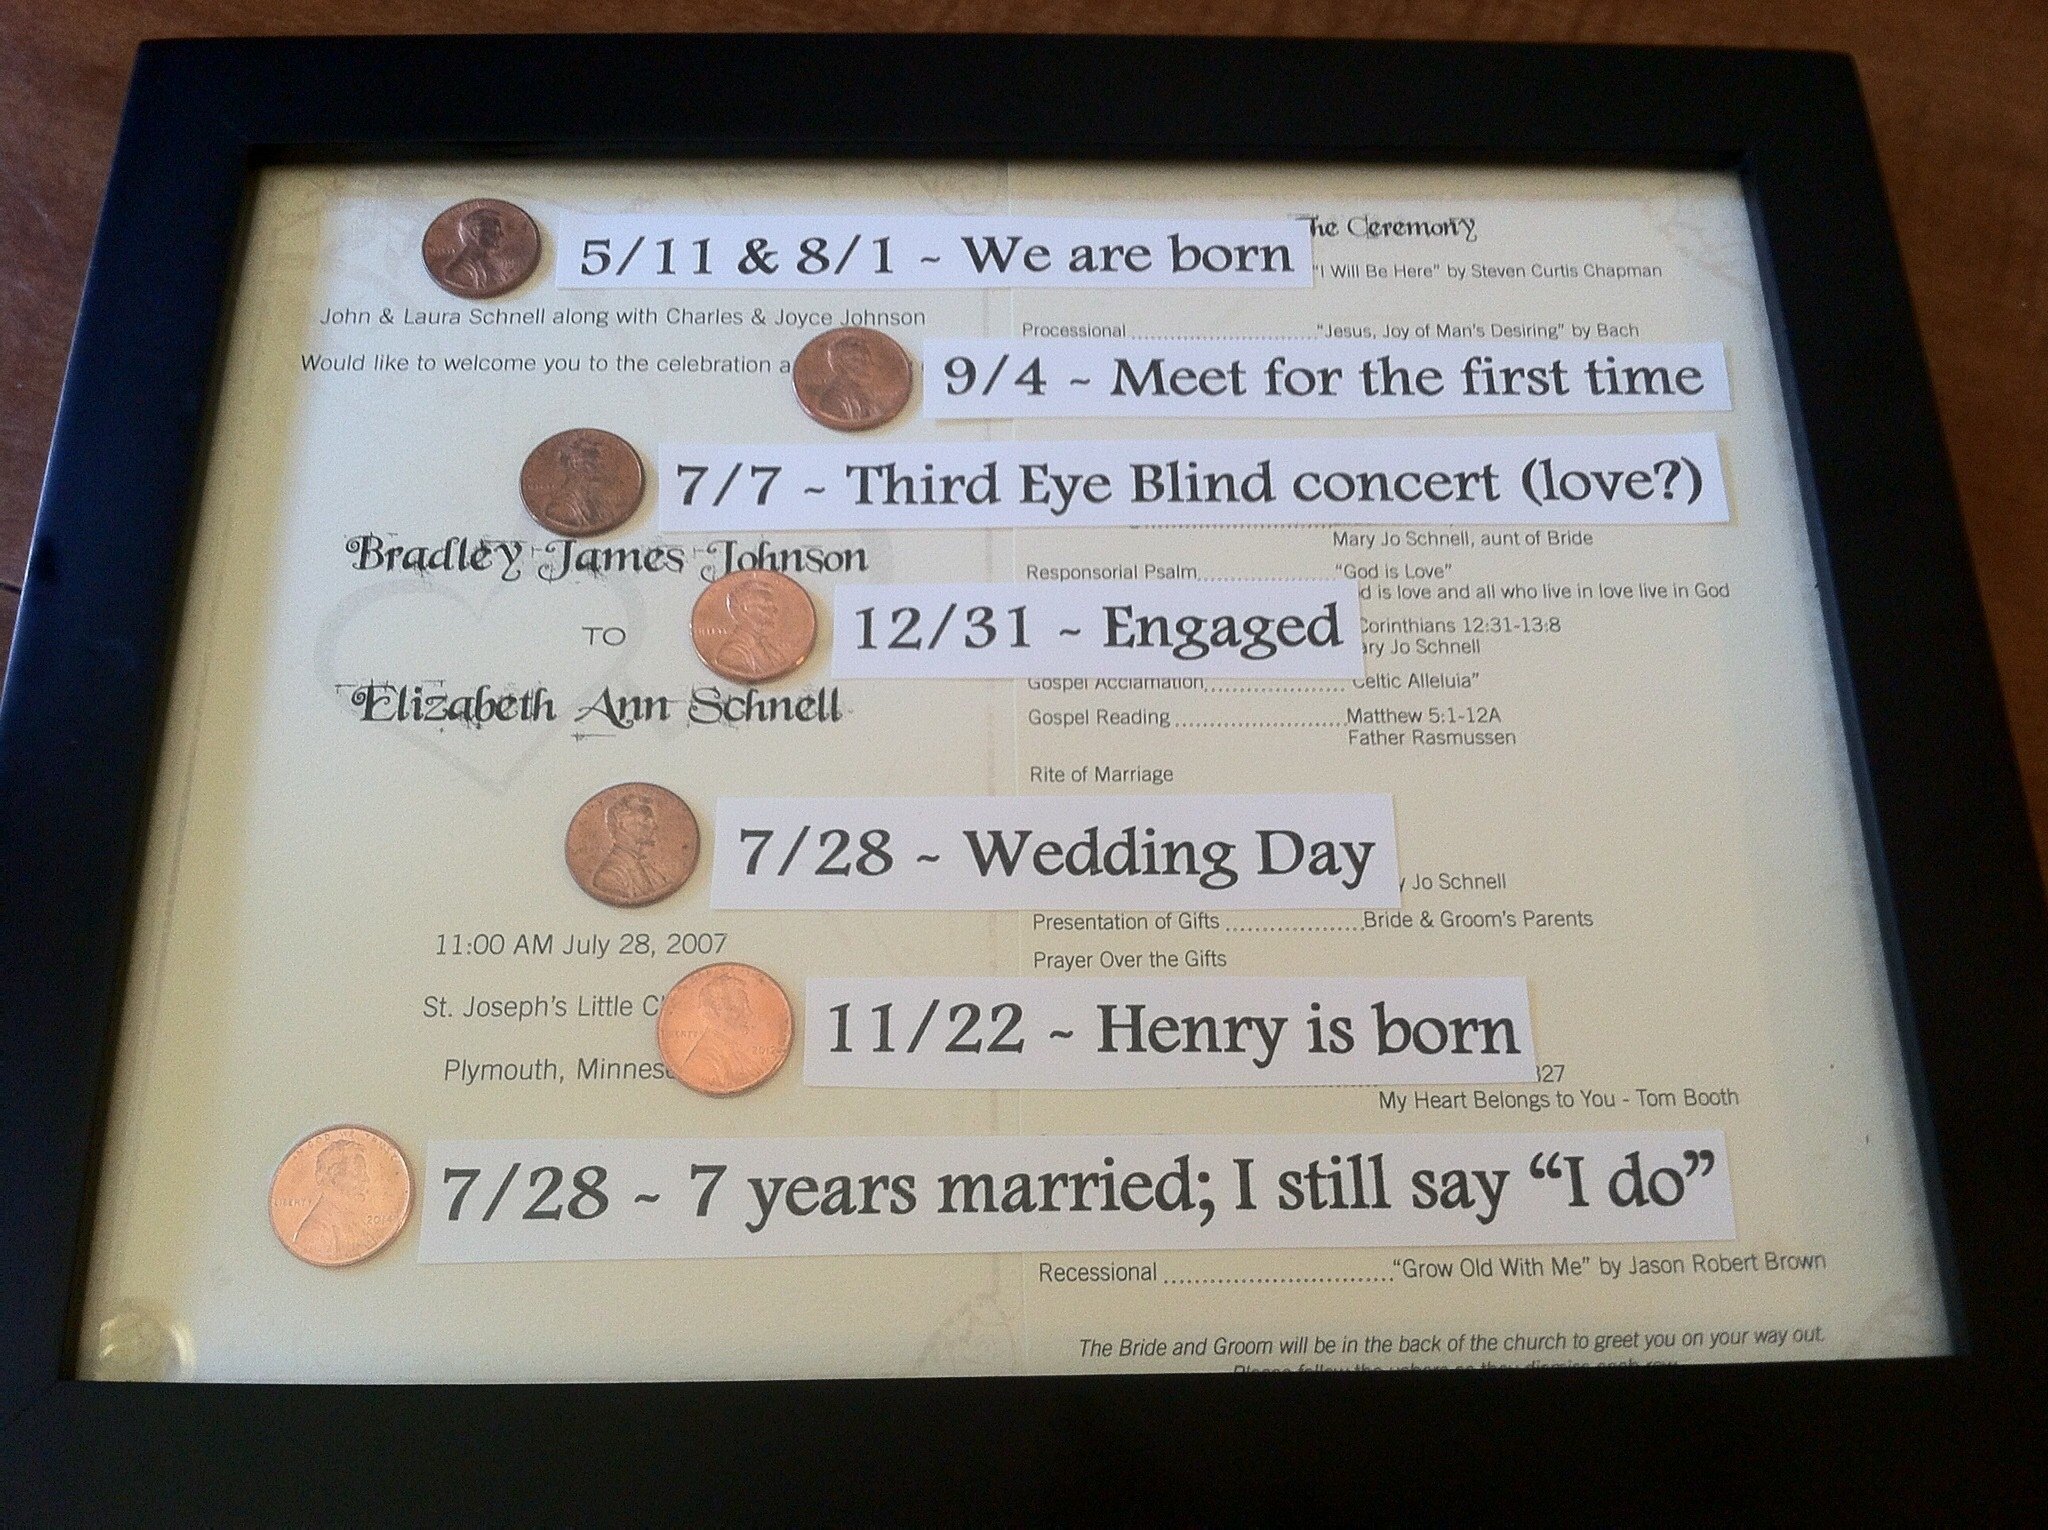 10 Nice 11 Year Anniversary Gift Ideas For Her 7 year wedding anniversary gift ideas for him elegant 7 year wedding 3 2022